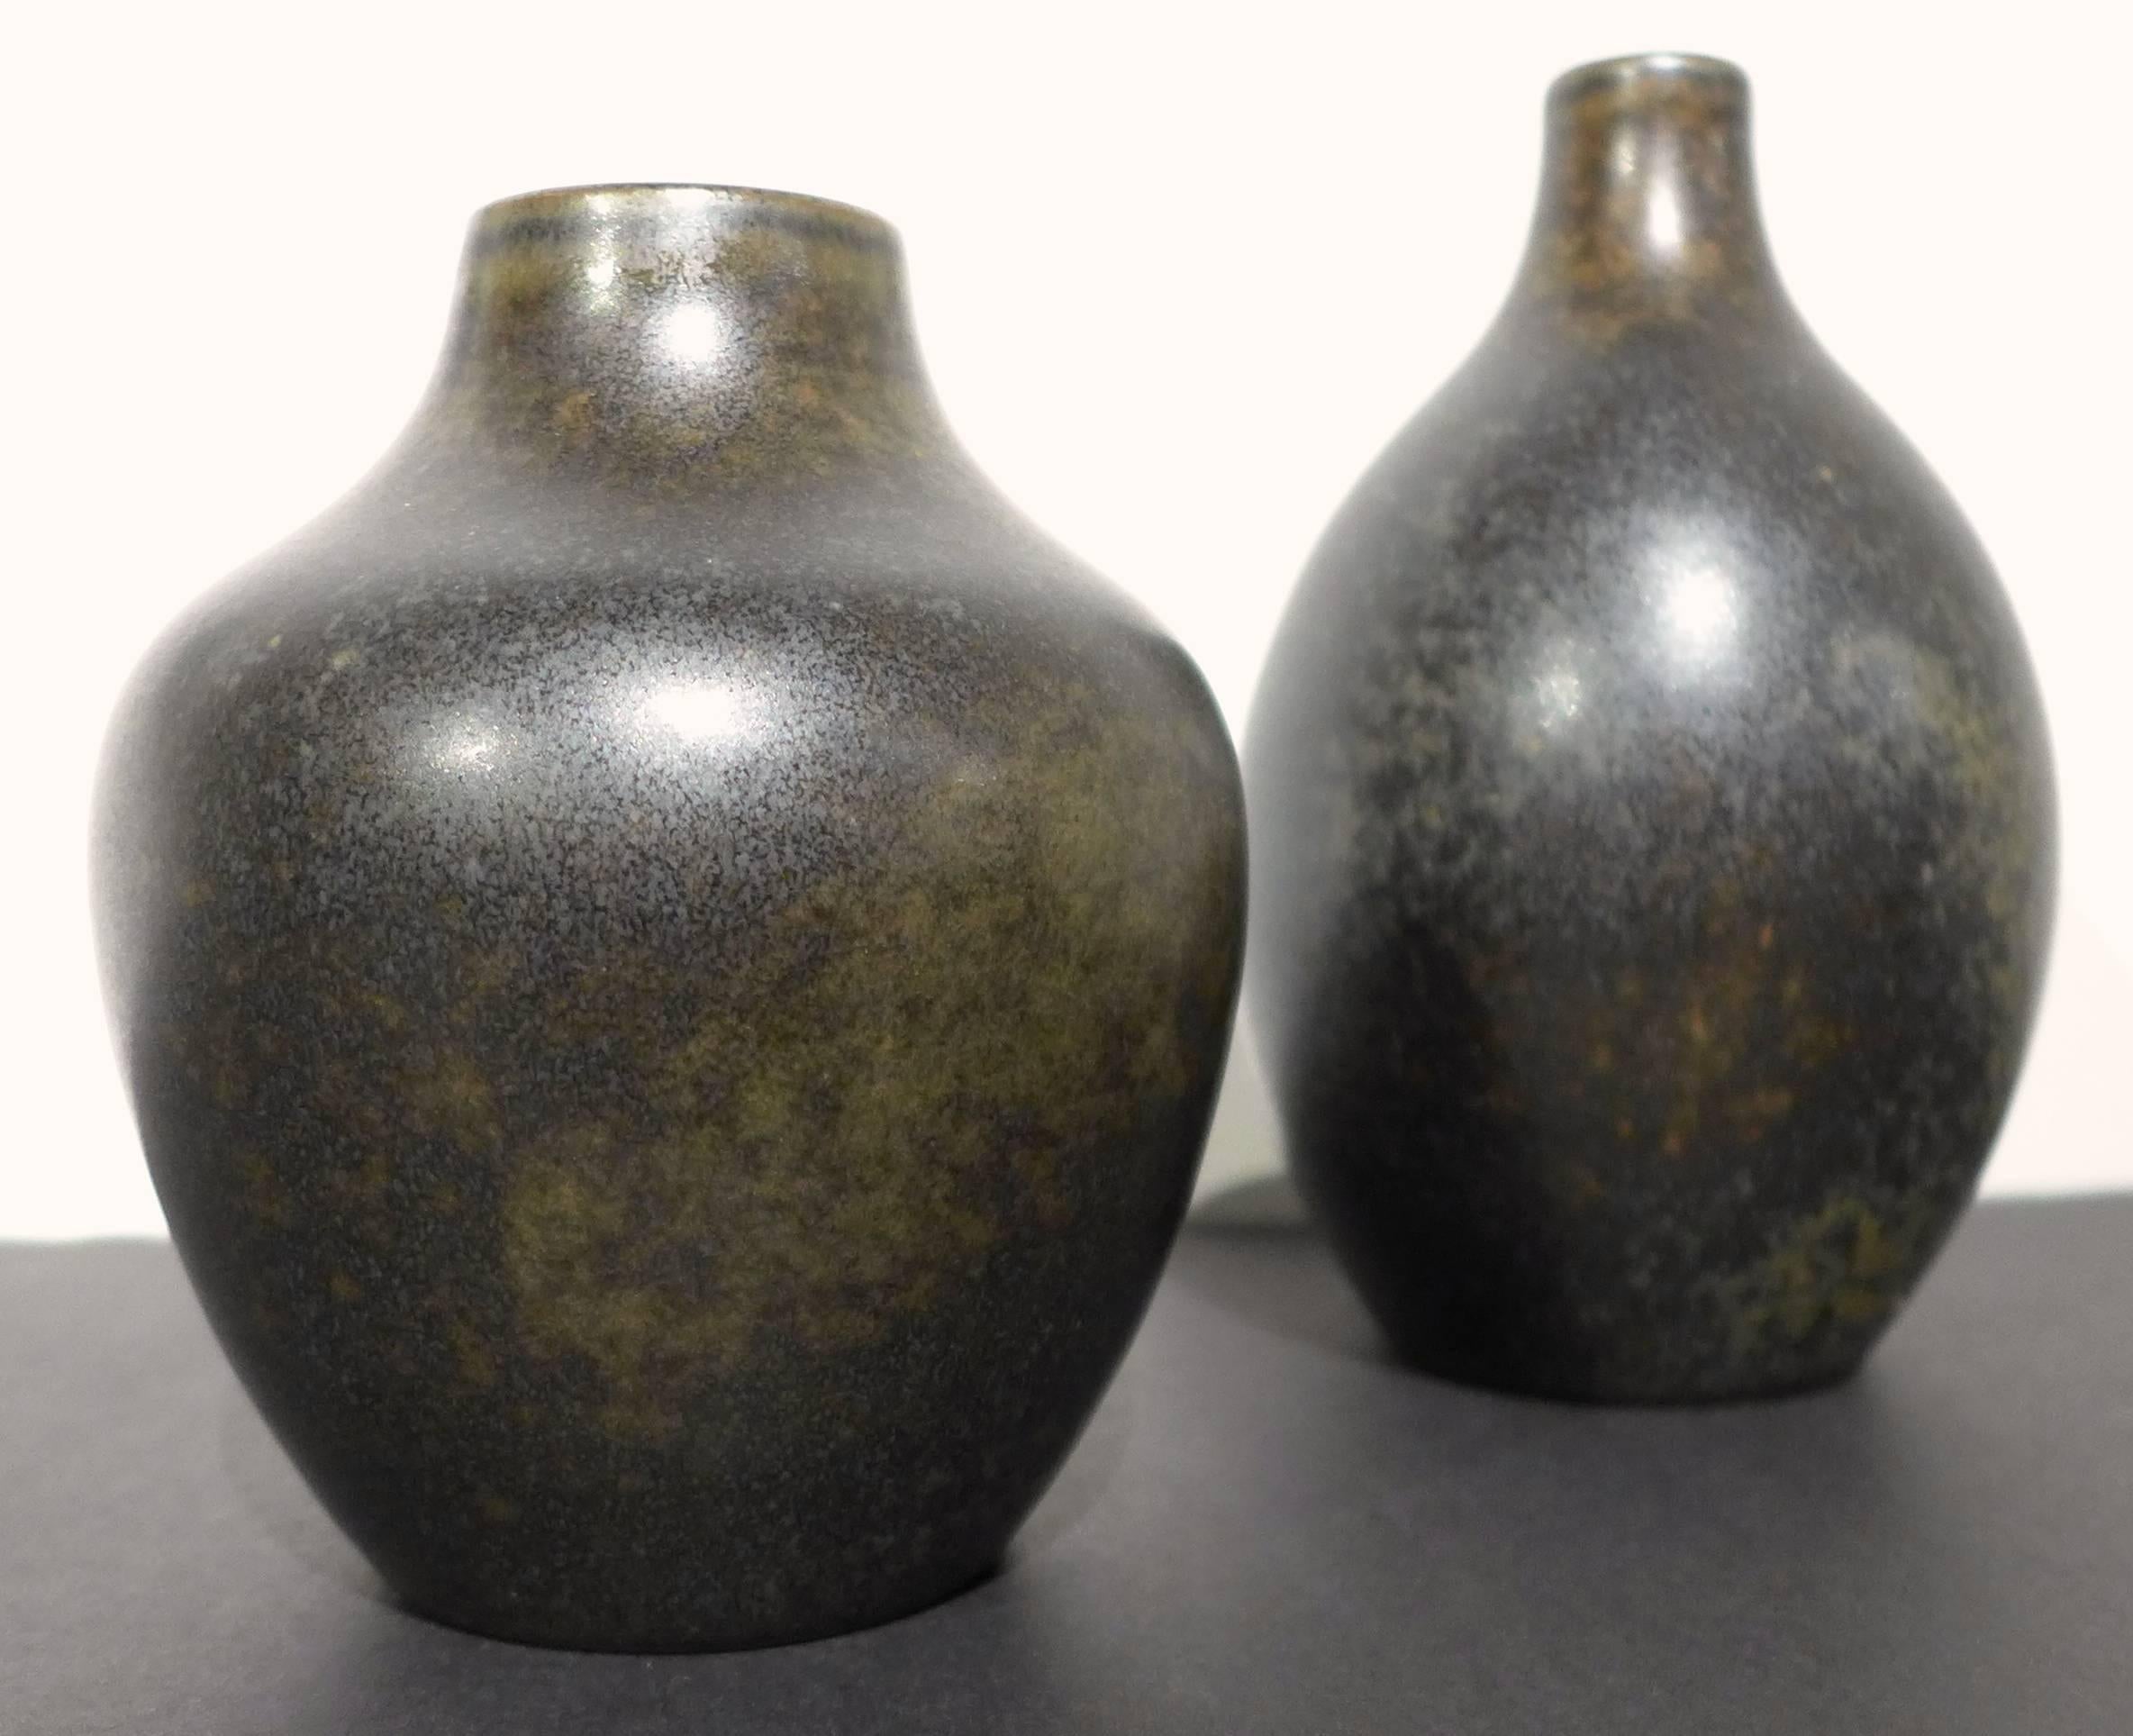 Group of five vases ranging in height from 4.5